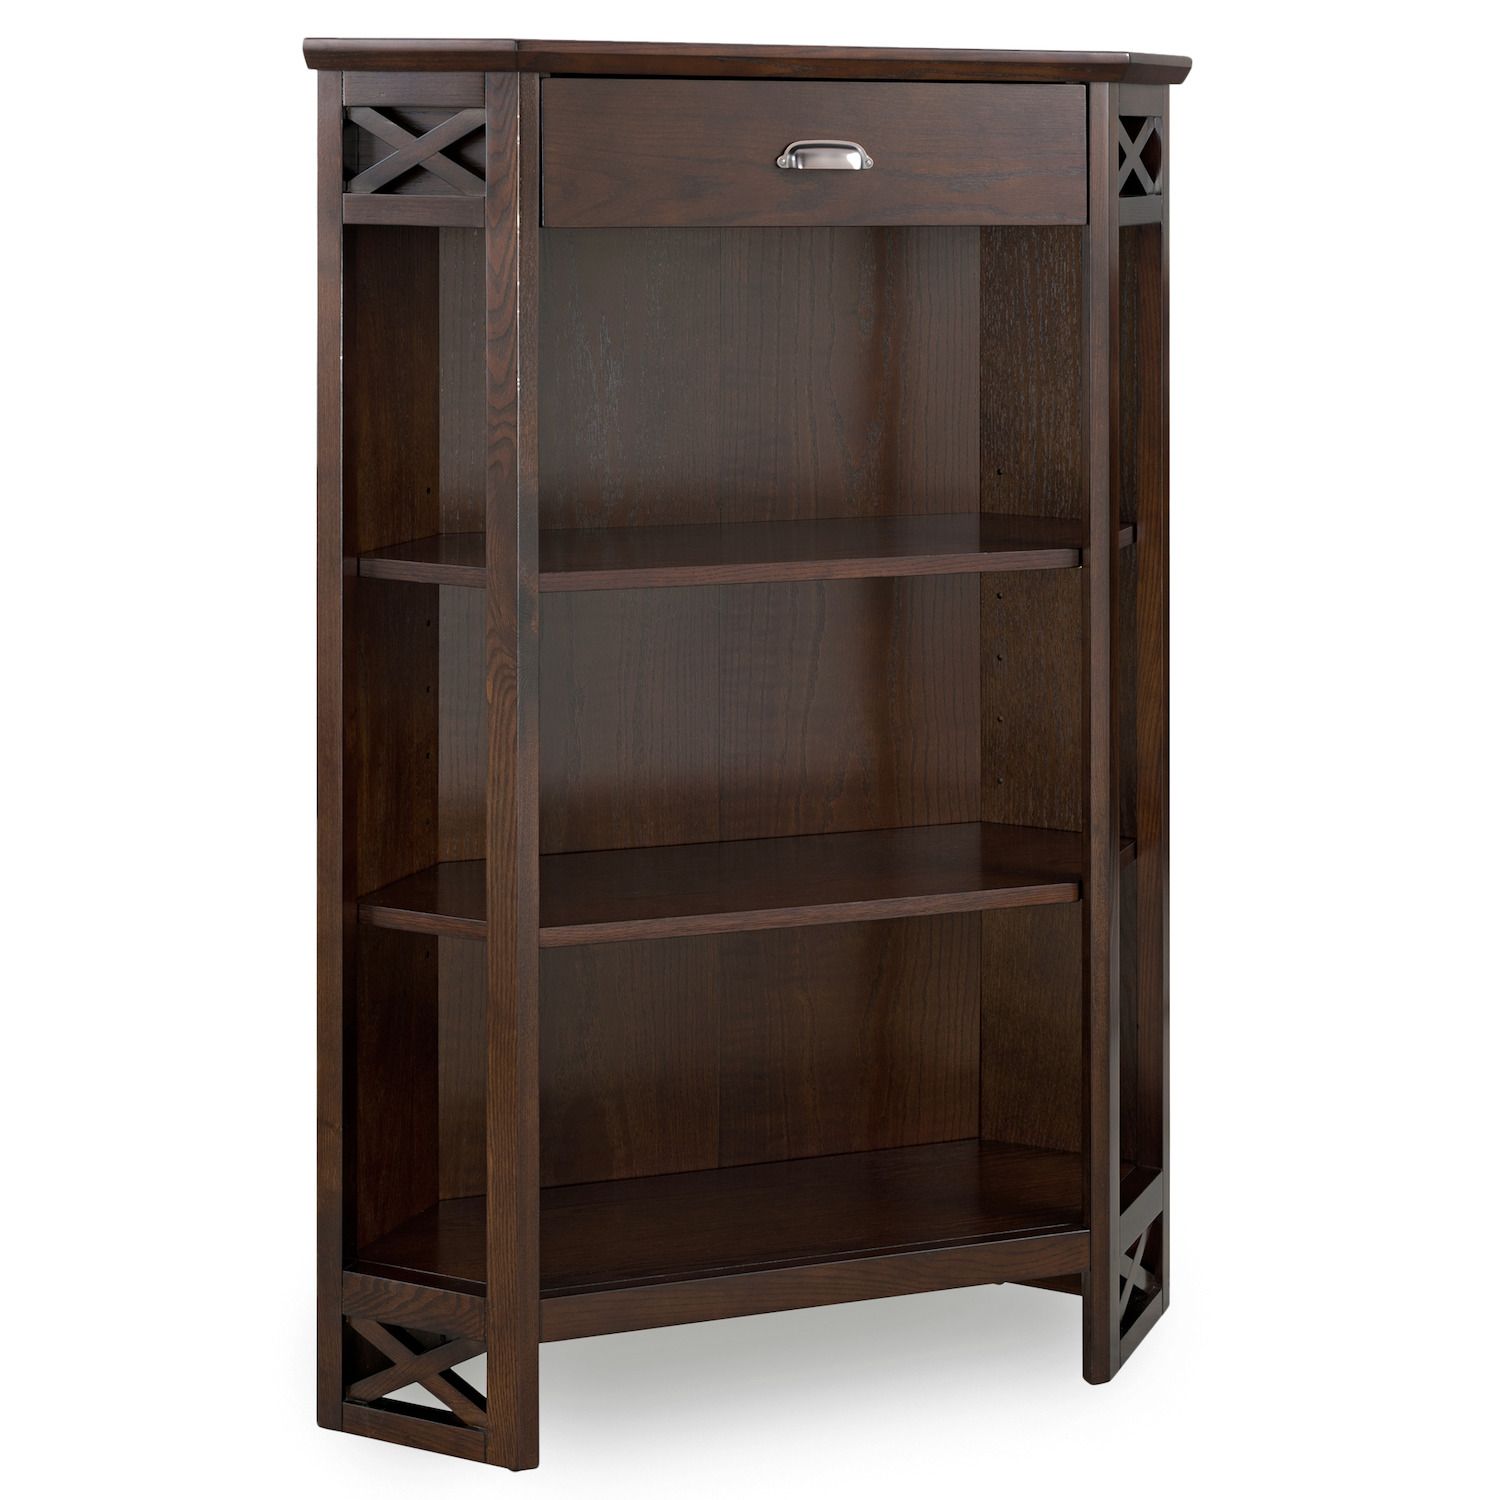 Image for Leick Furniture Chocolate Oak Corner Bookcase w/ Drawer at Kohl's.